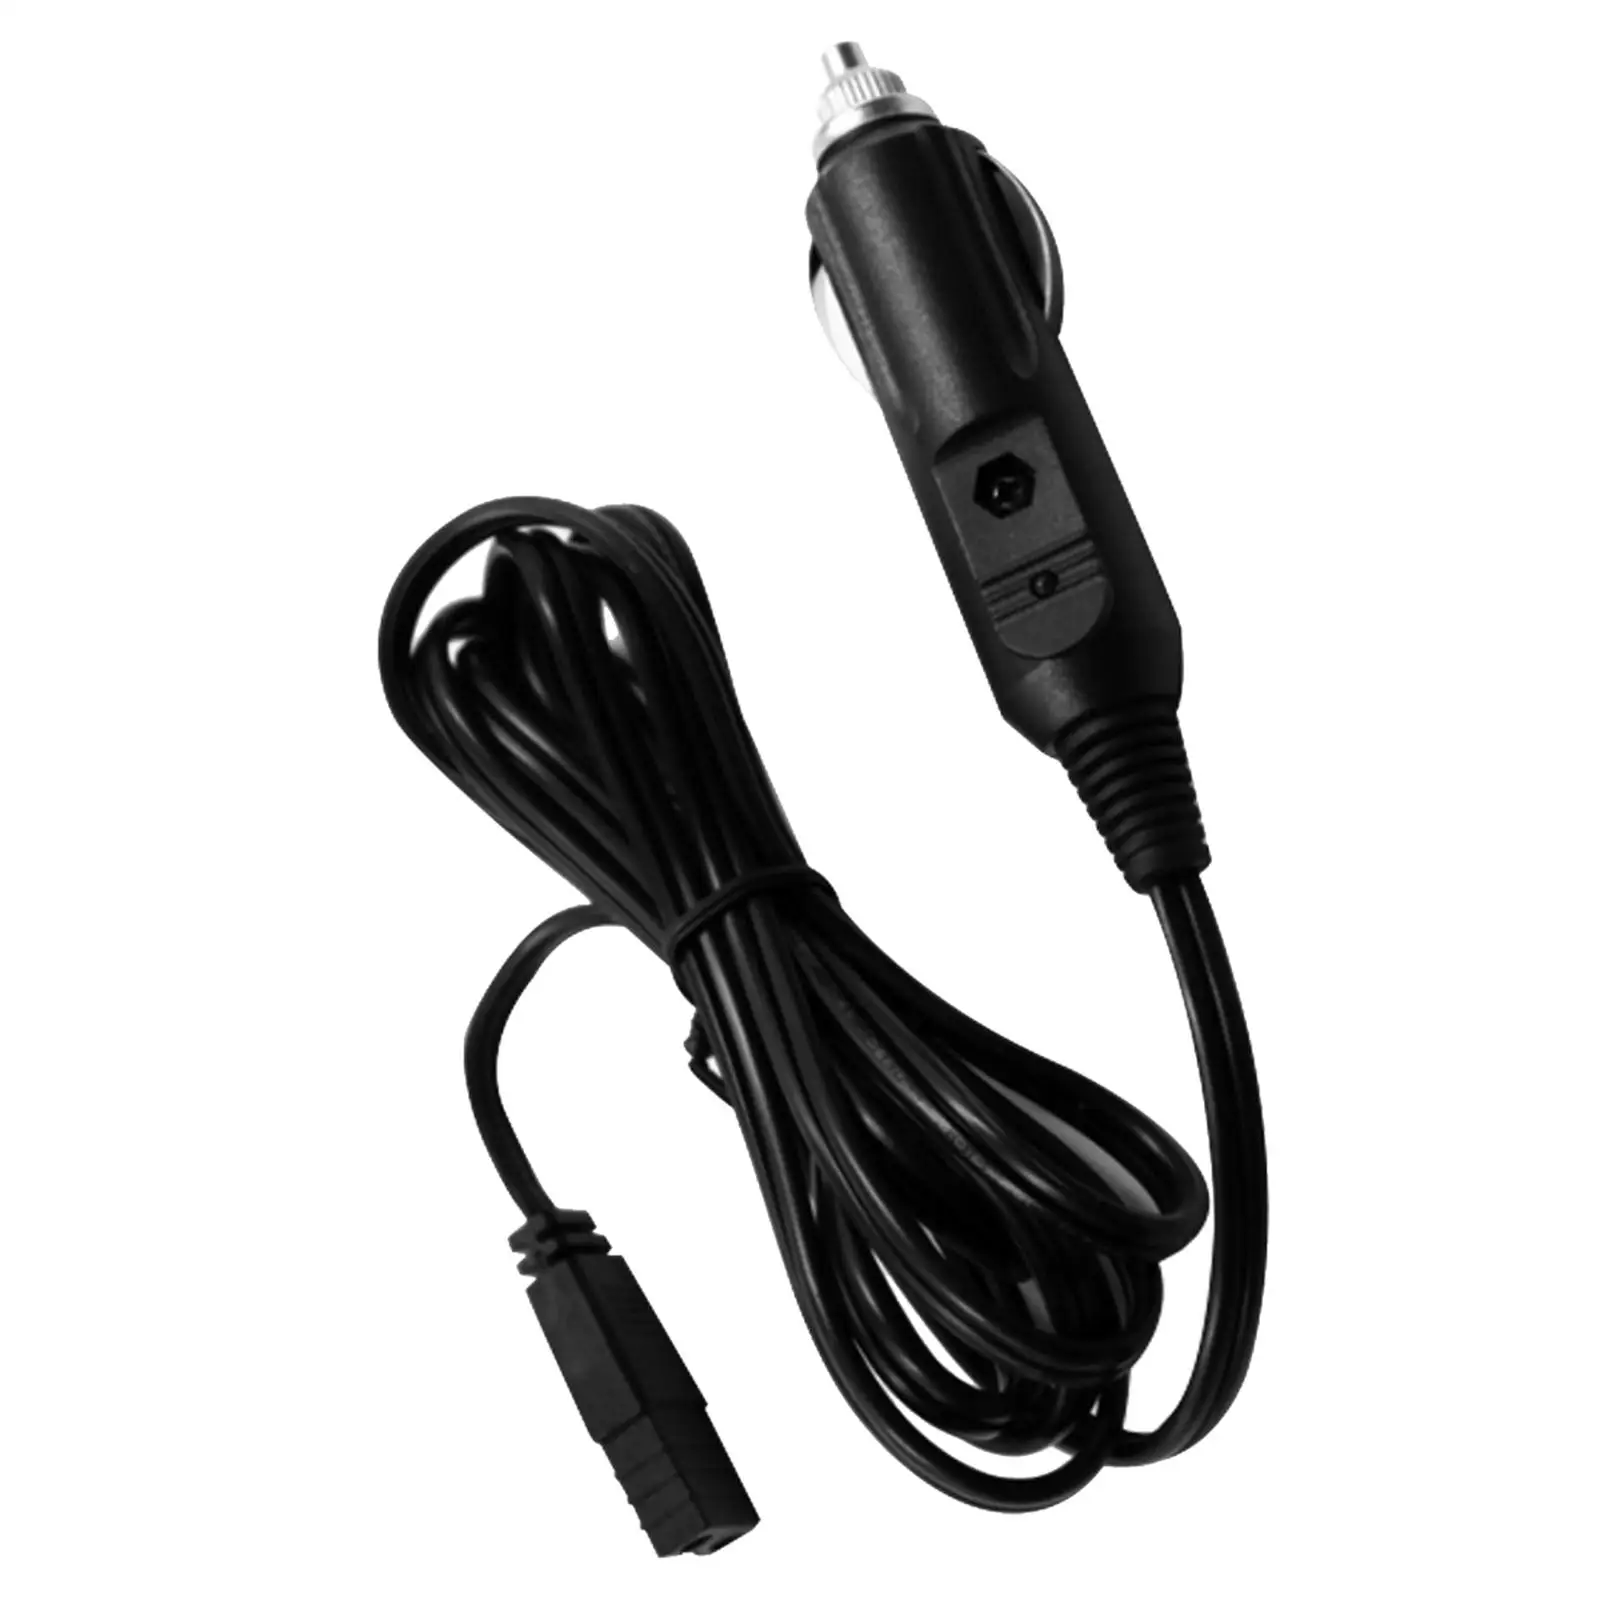 63inch Power Cable Cord DC 12V 24V for Car Refrigerator Cooler Easily Install Wide Application Durable Portable Space Saving